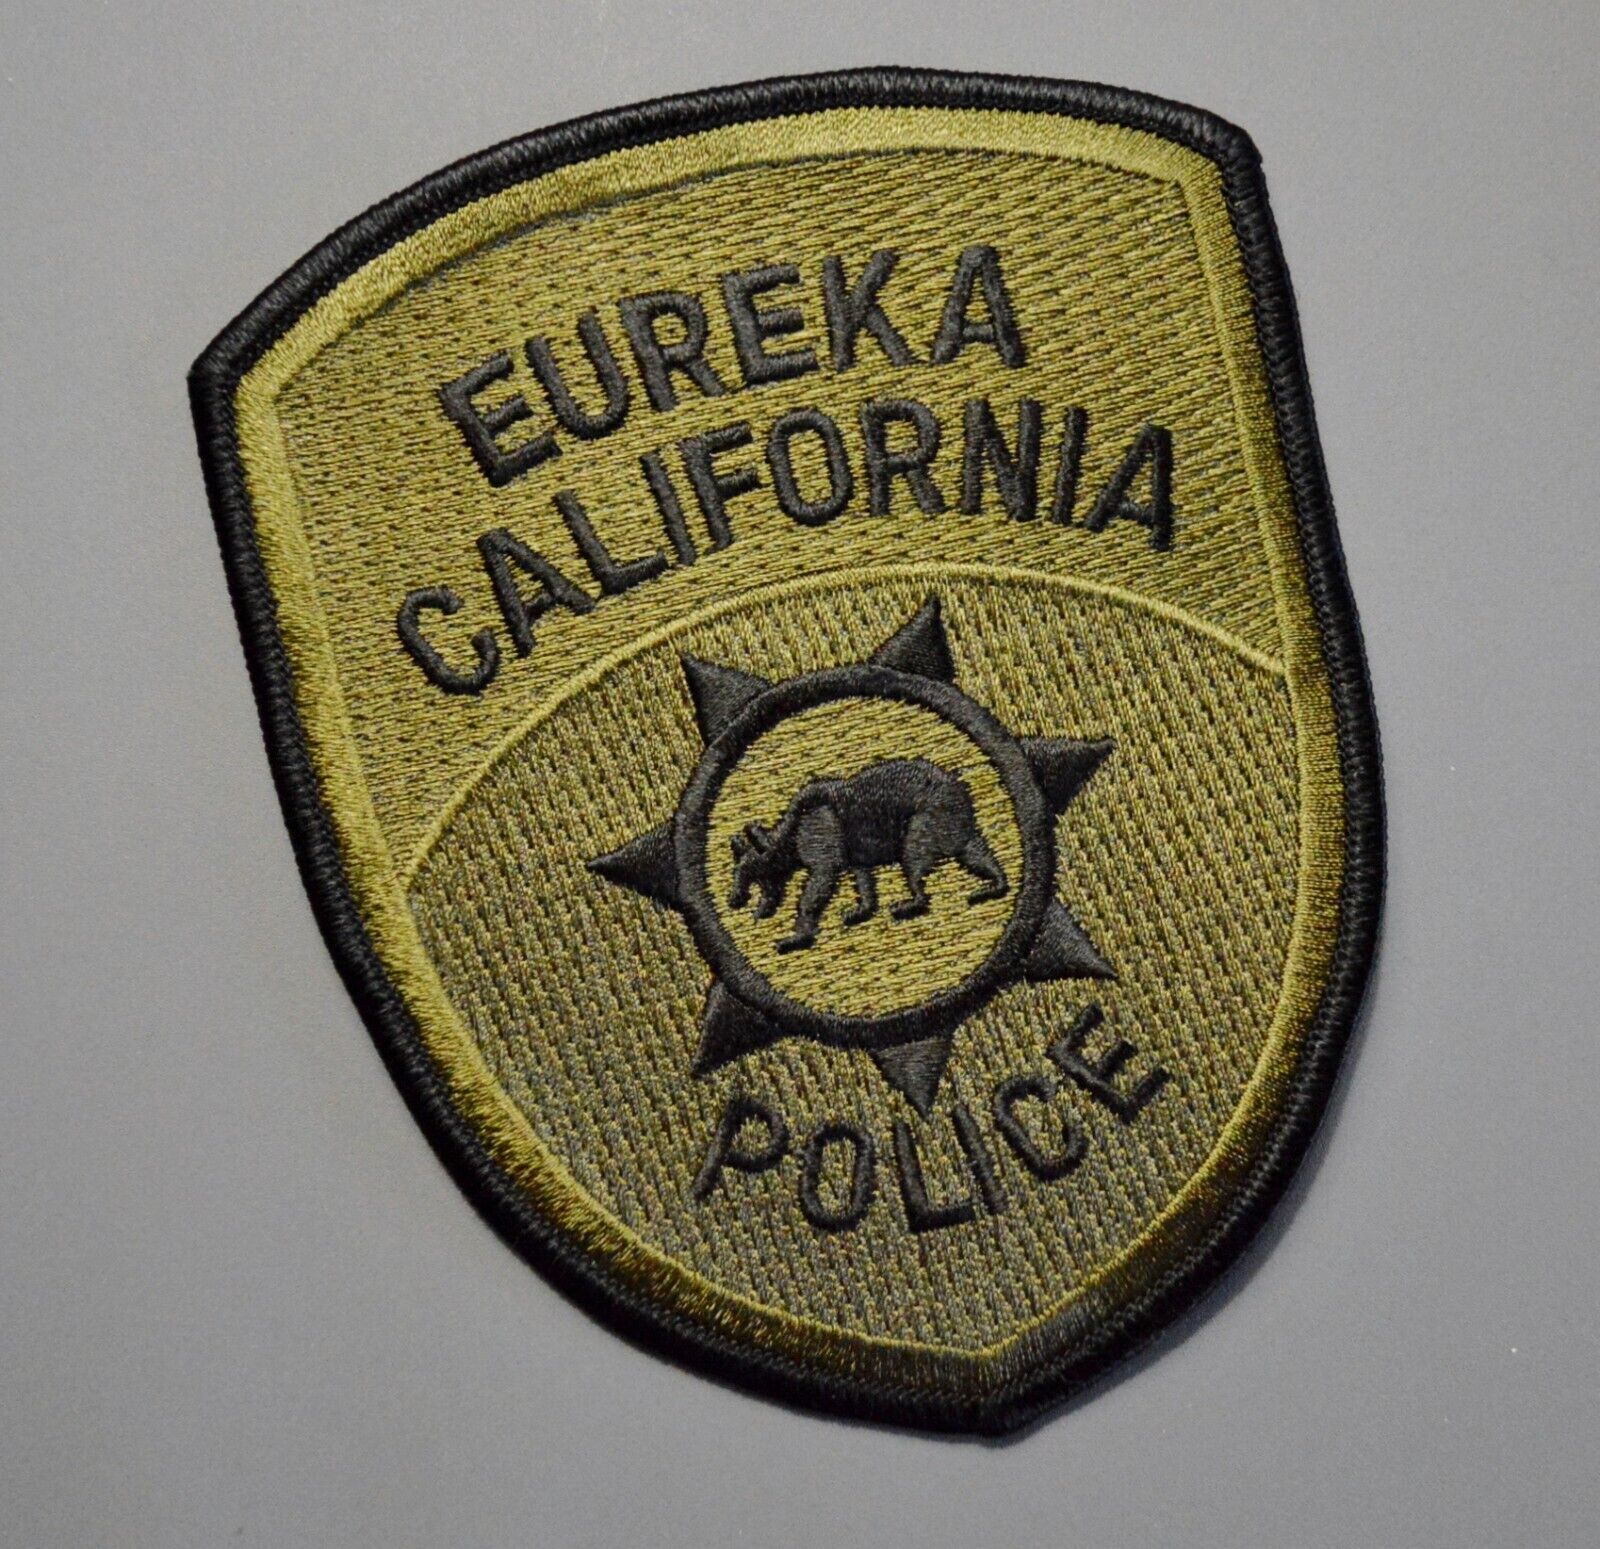 Eureka California Police Subdued Olive Drab Patch ++ Mint Humboldt County CA